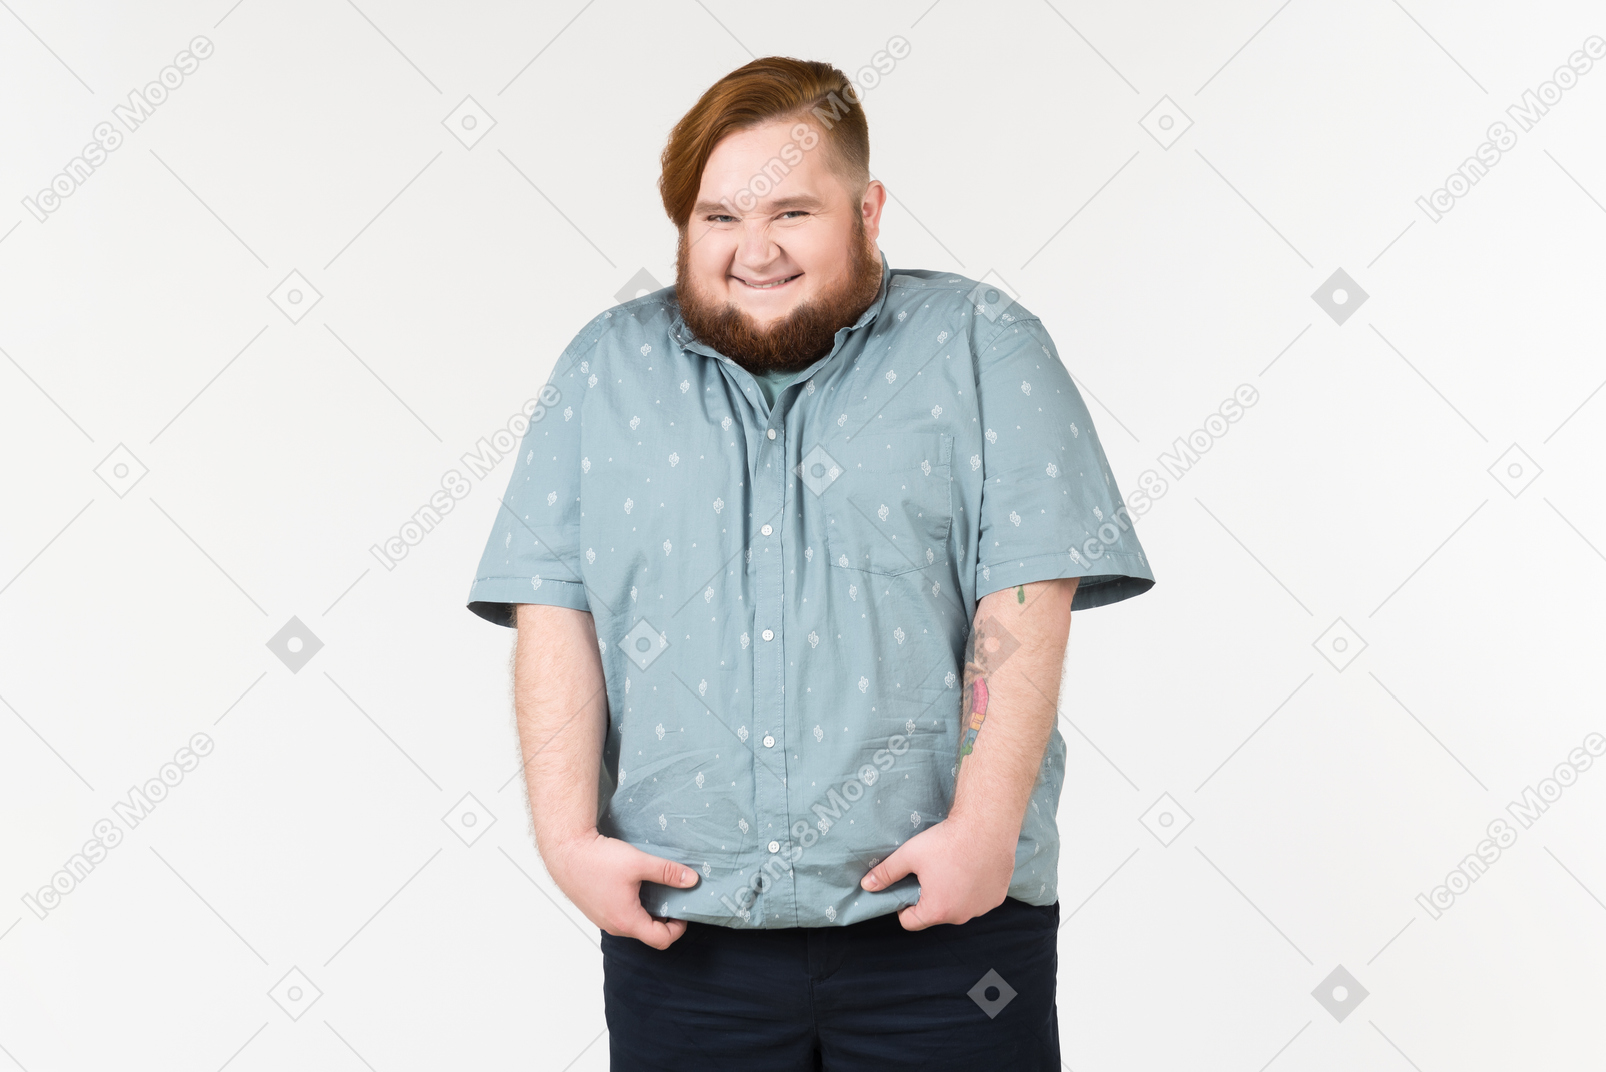 A fat man smiling shyly